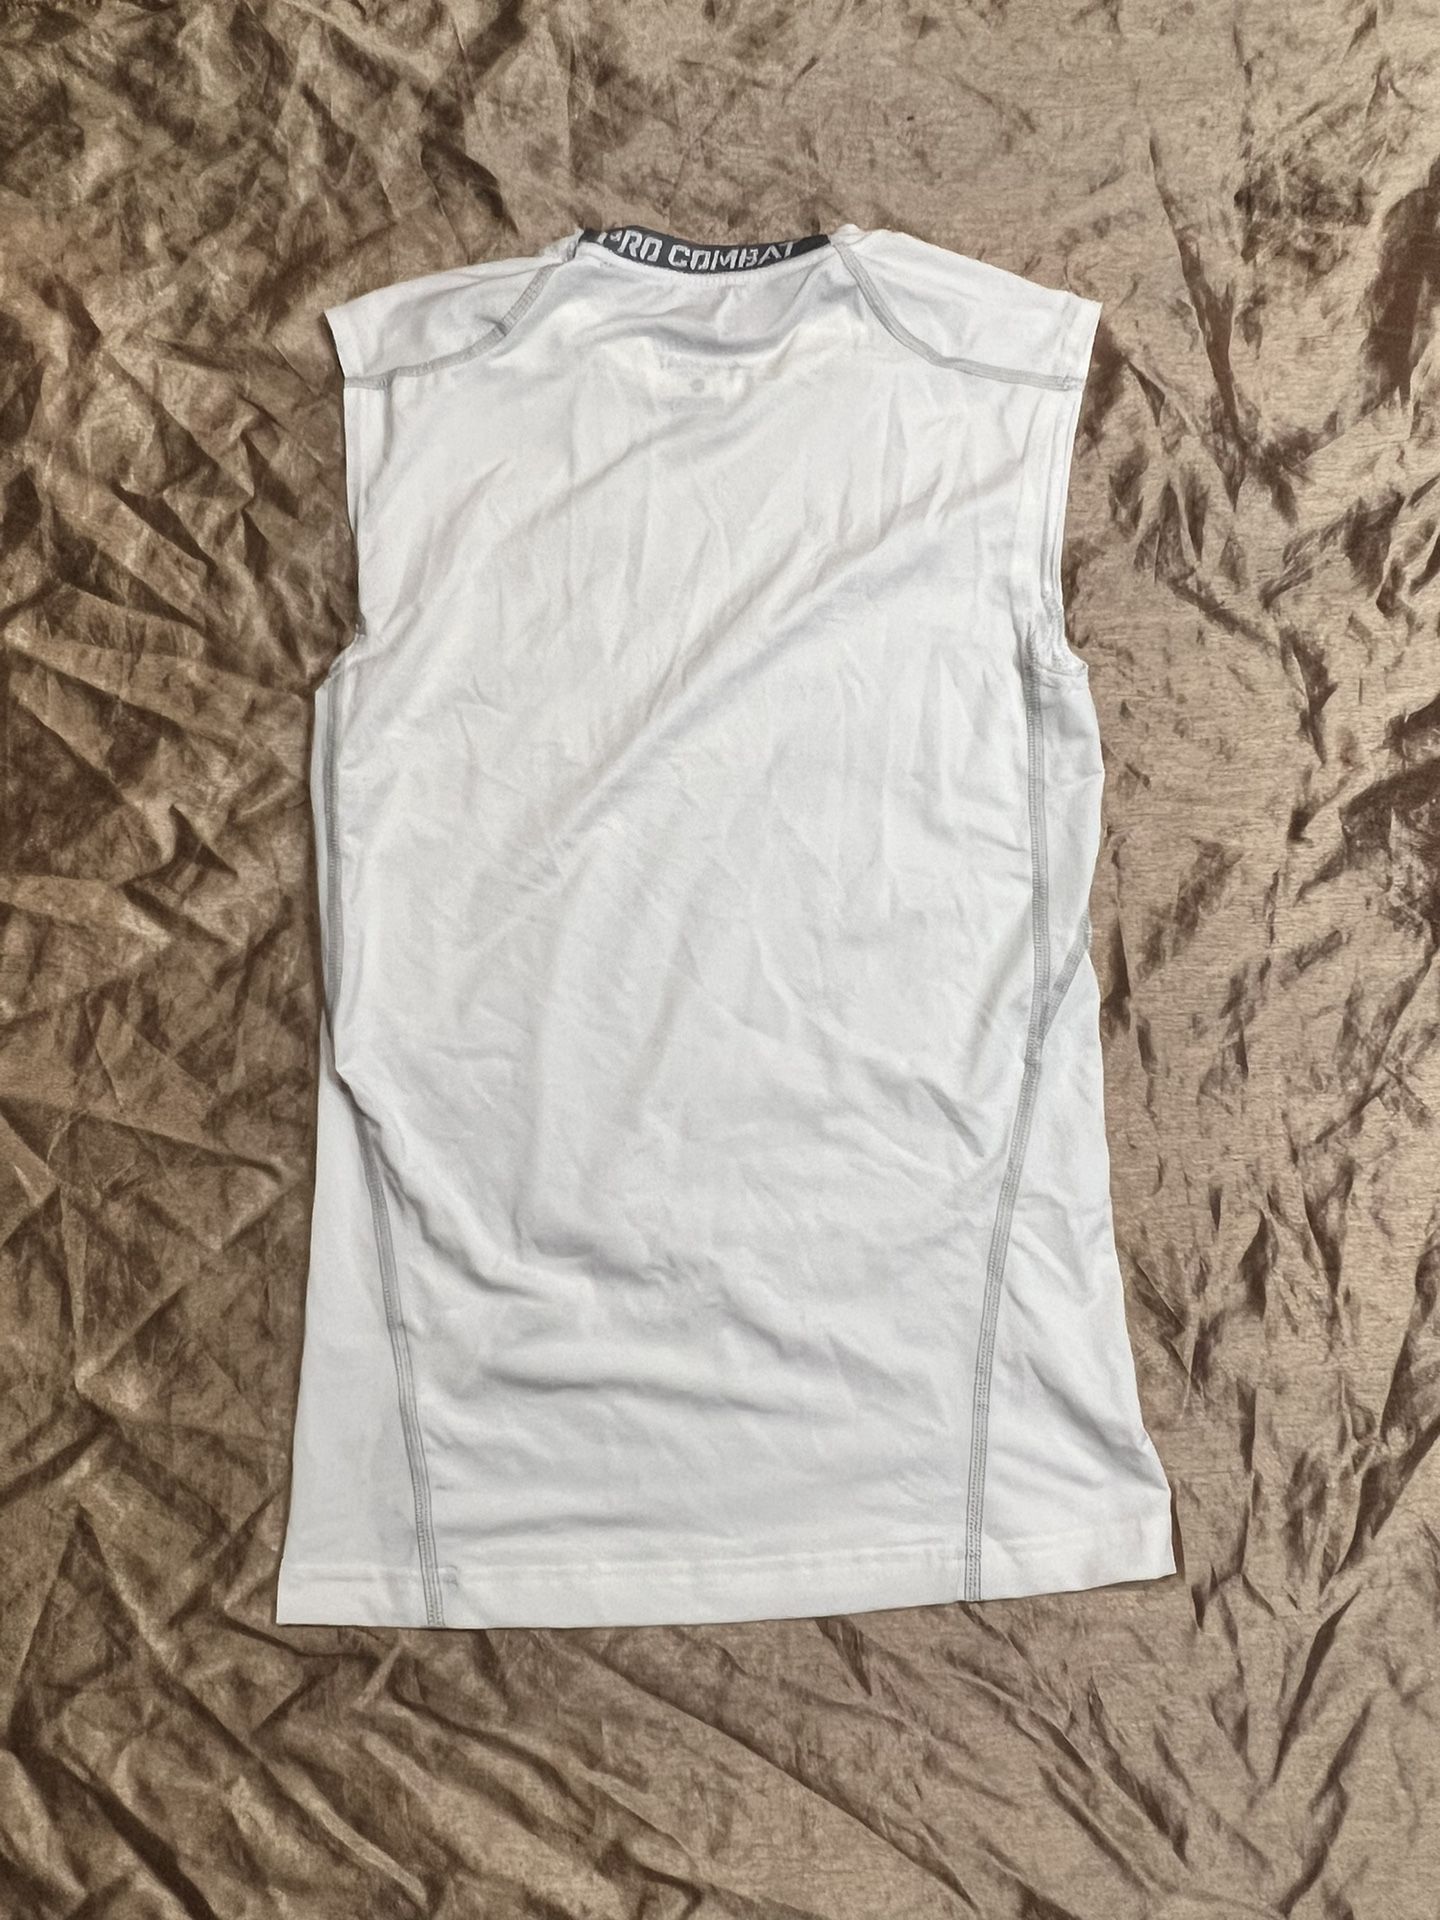 Nike NBA Compression Tank Top for Sale in Calabasas, CA - OfferUp